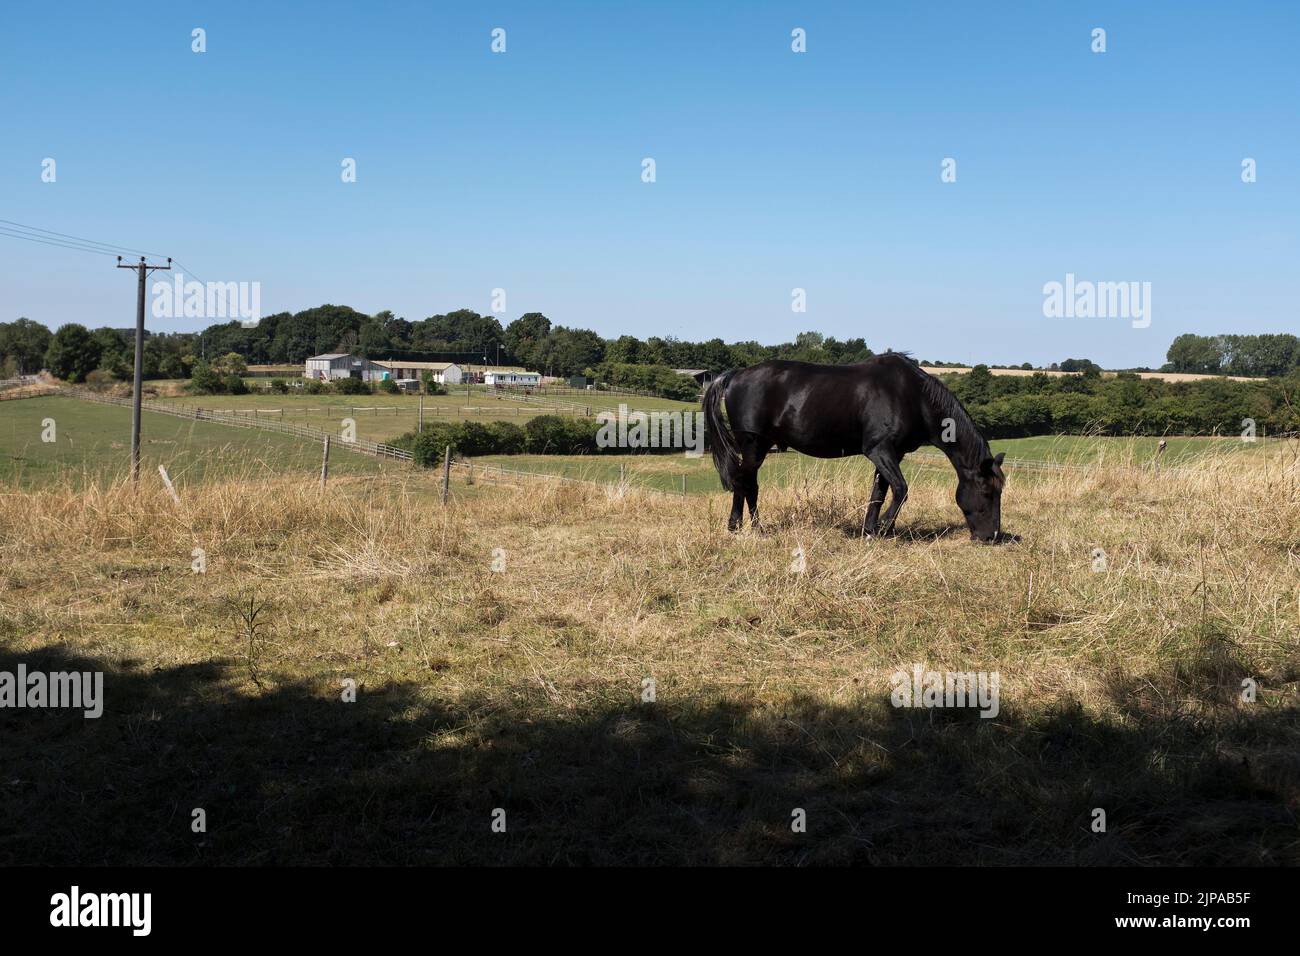 dh Horses stables CLIFFORD YORKSHIRE Black young horse pony grazing in a field uk Stock Photo